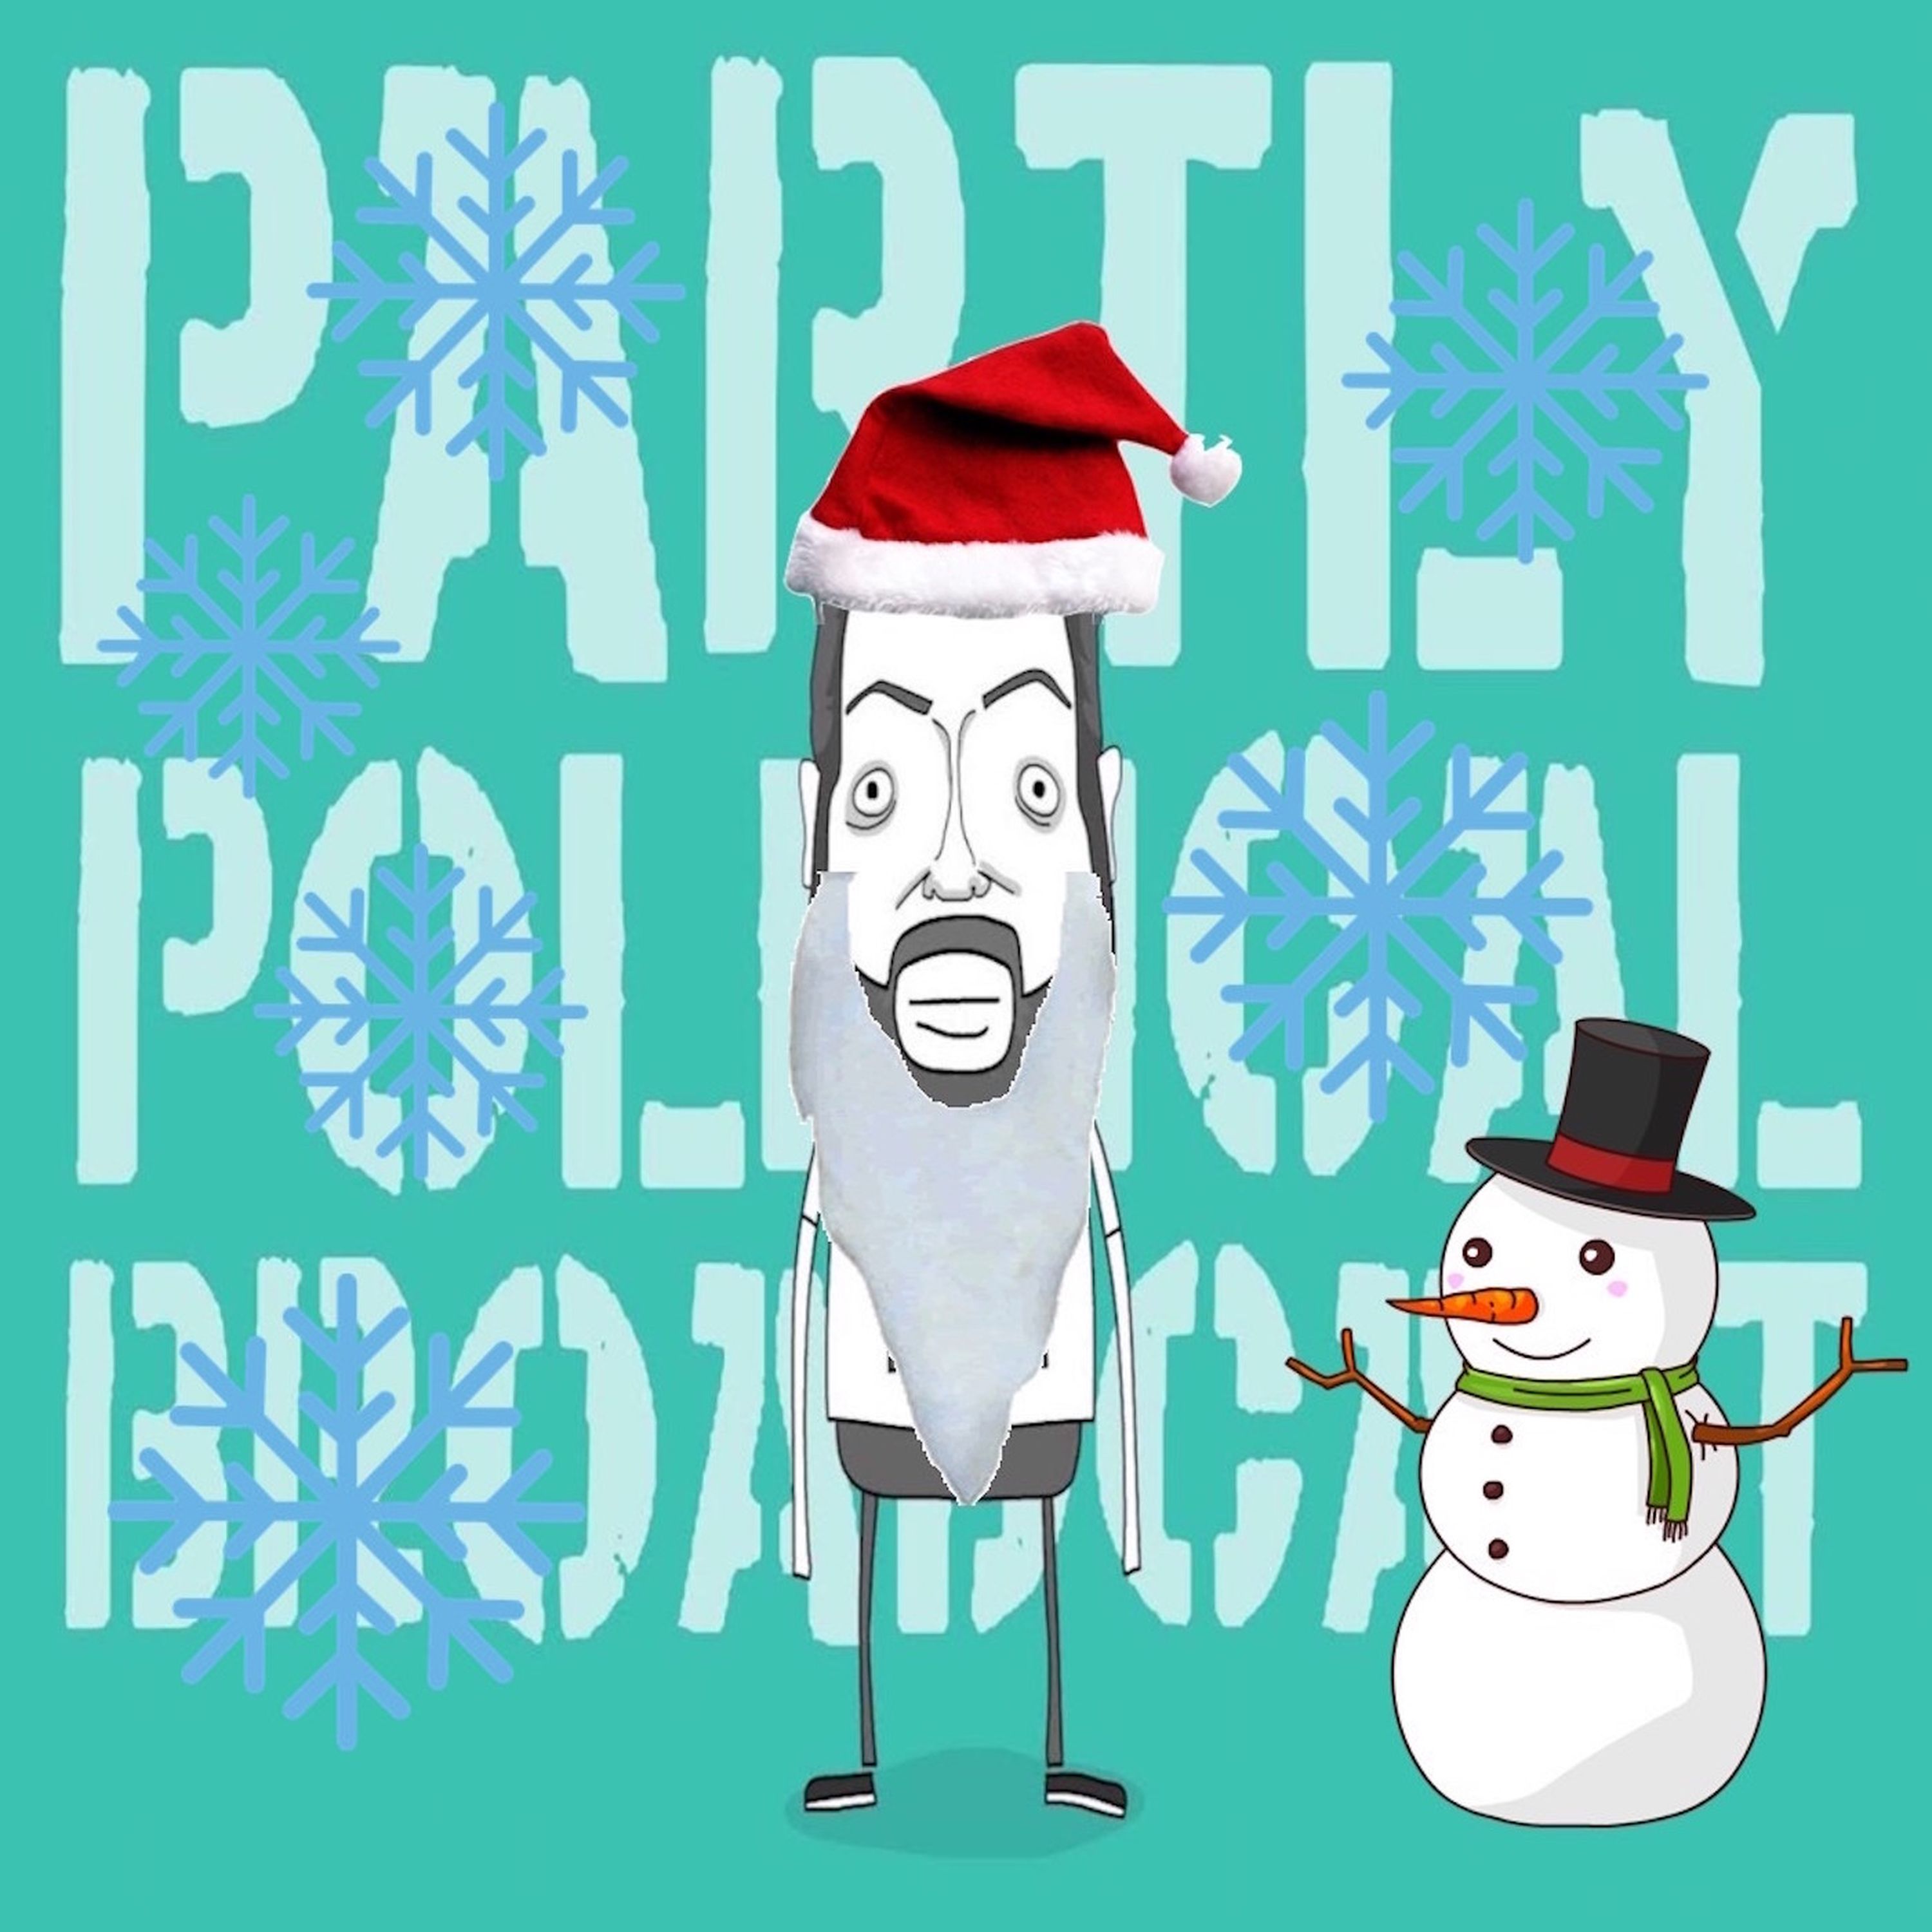 ParPolBroMas2020 - Mutant Christmas Variant and a message from Father Christmas